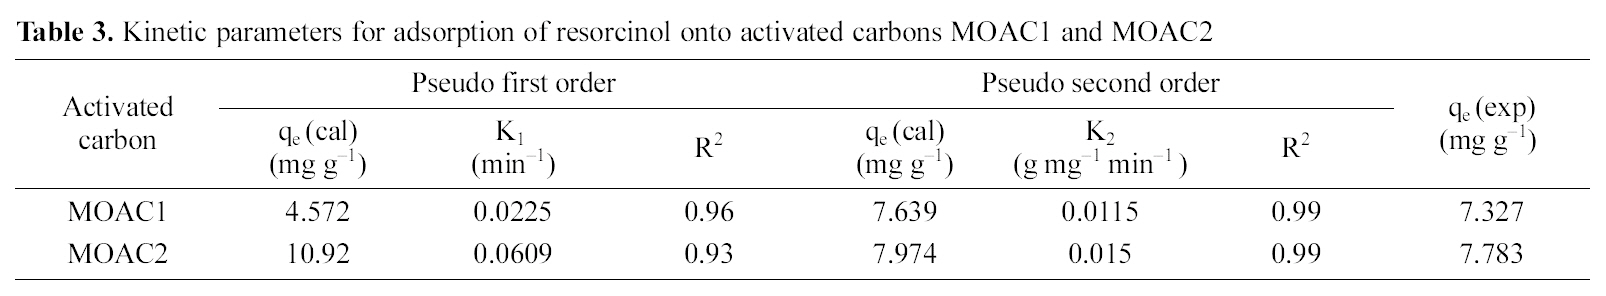 Kinetic parameters for adsorption of resorcinol onto activated carbons MOAC1 and MOAC2